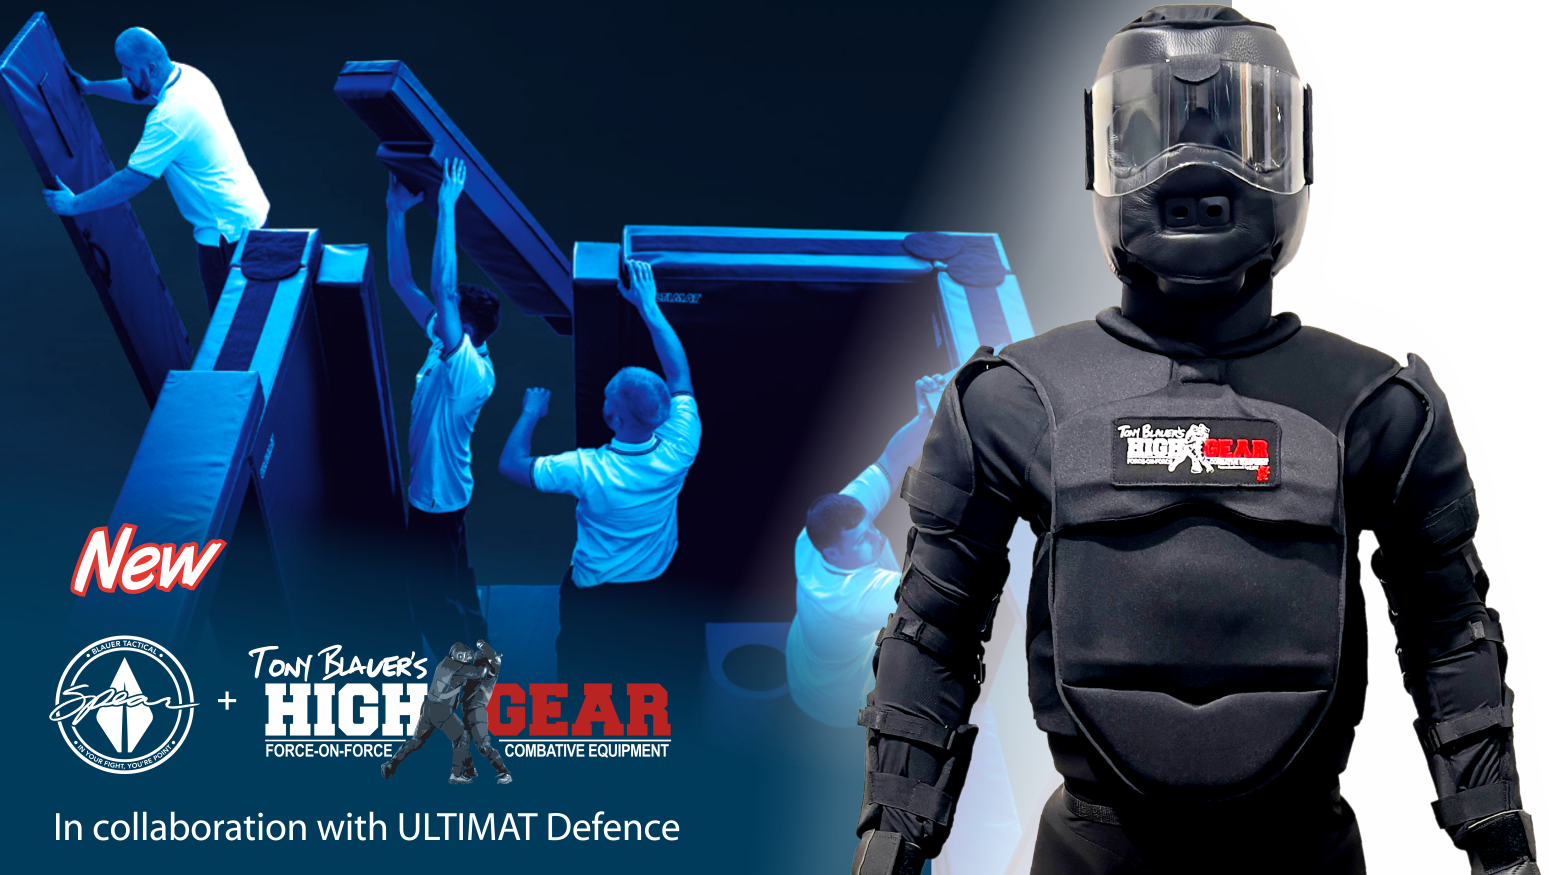 ULTIMAT + Tony Blauer: working together to bring High Gear Tactical Training Equipment to Europe